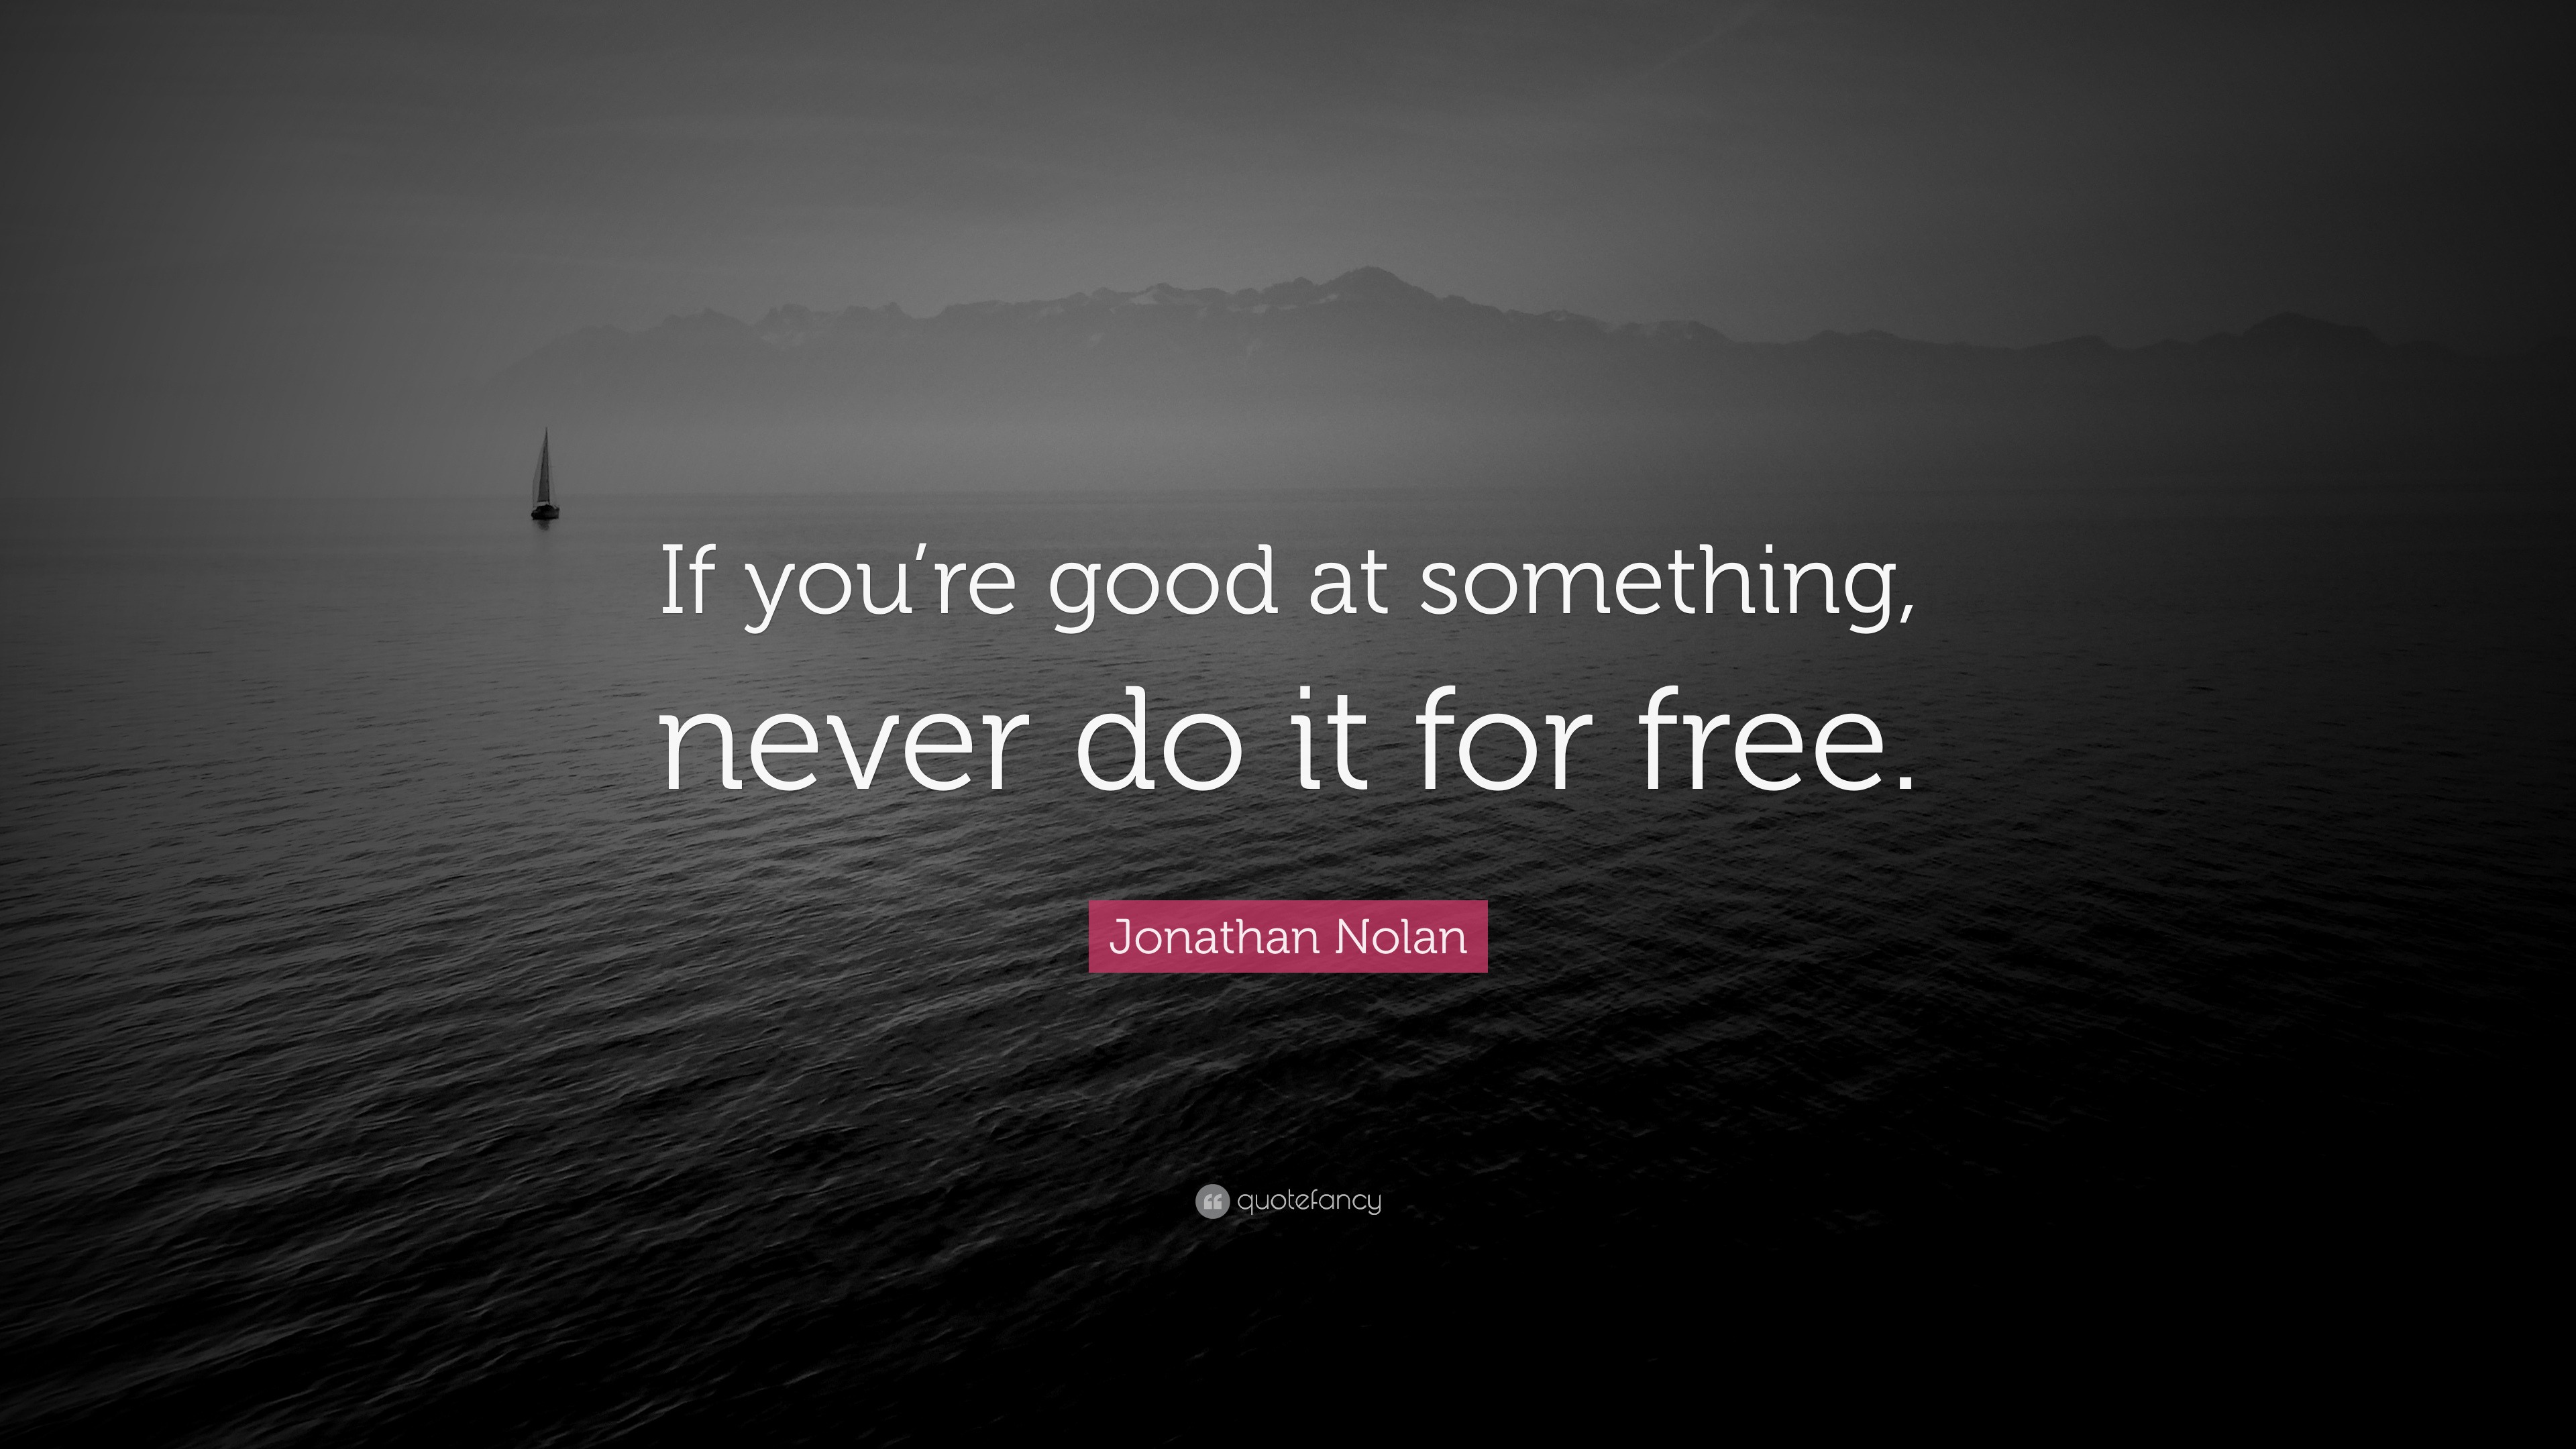 Jonathan Nolan Quote If You Re Good At Something Never Do It For Free 12 Wallpapers Quotefancy